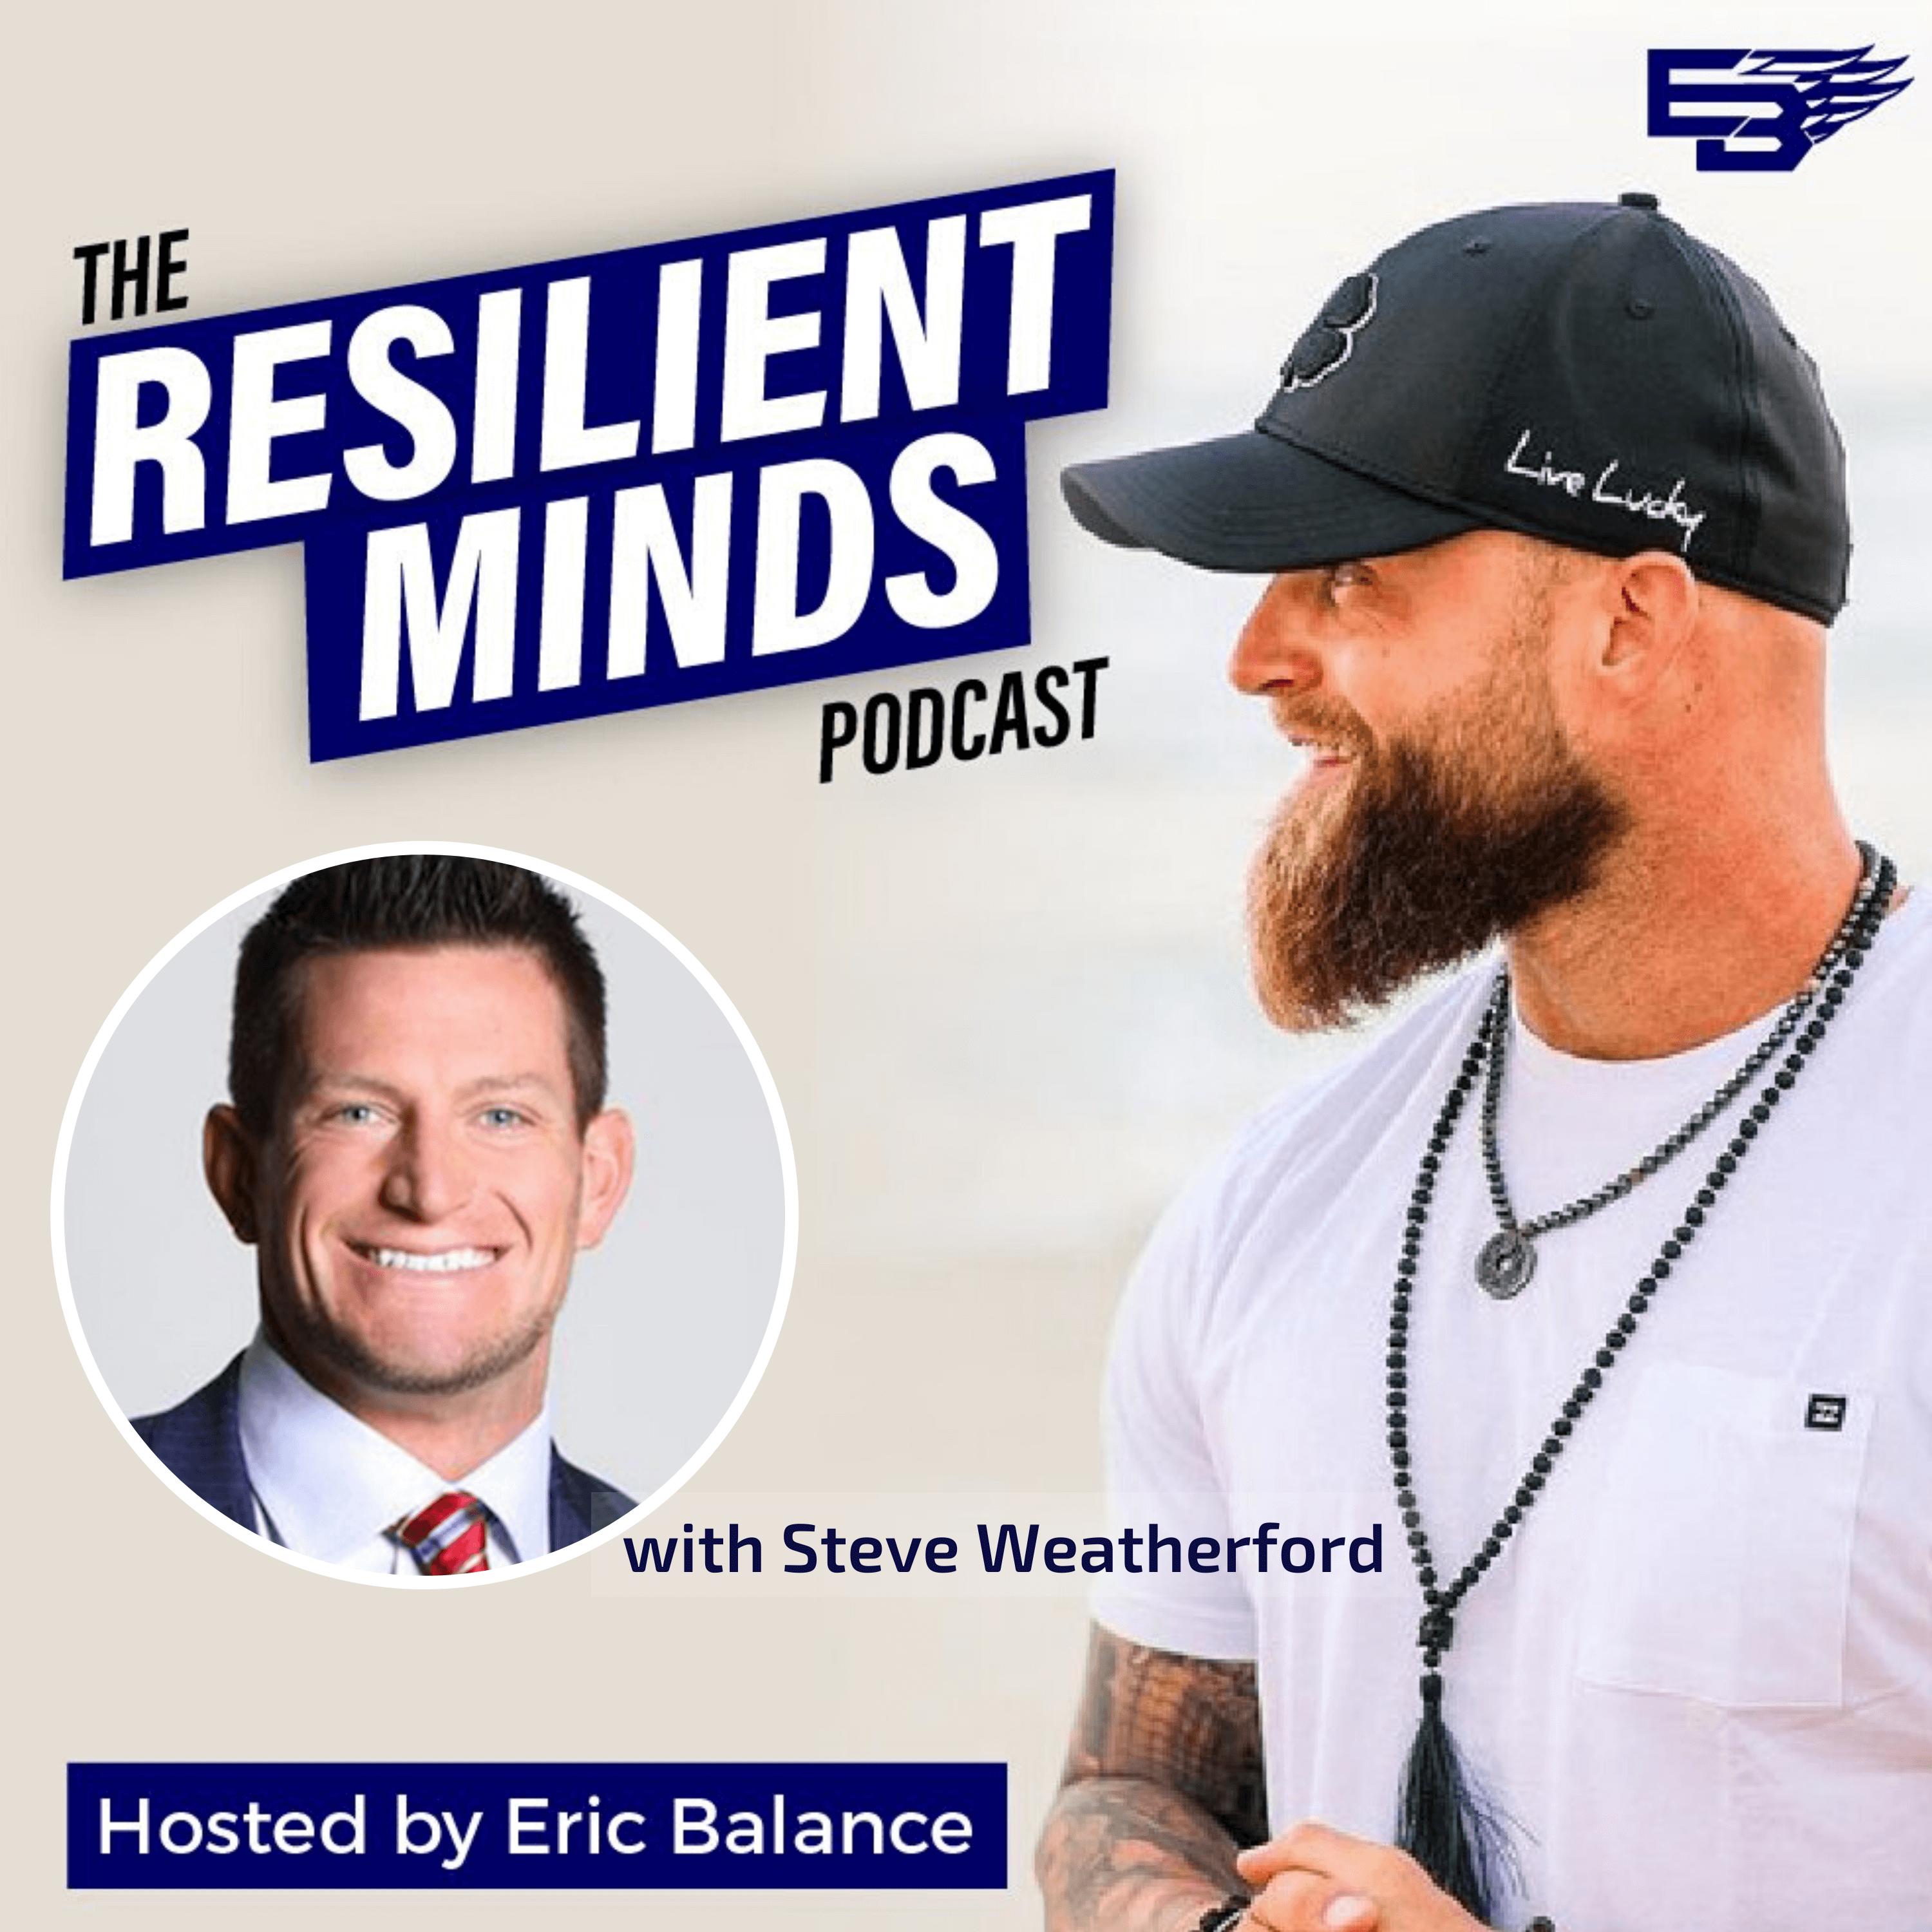 Episode 29 – How to Overcome Imposter Syndrome with Steve Weatherford.